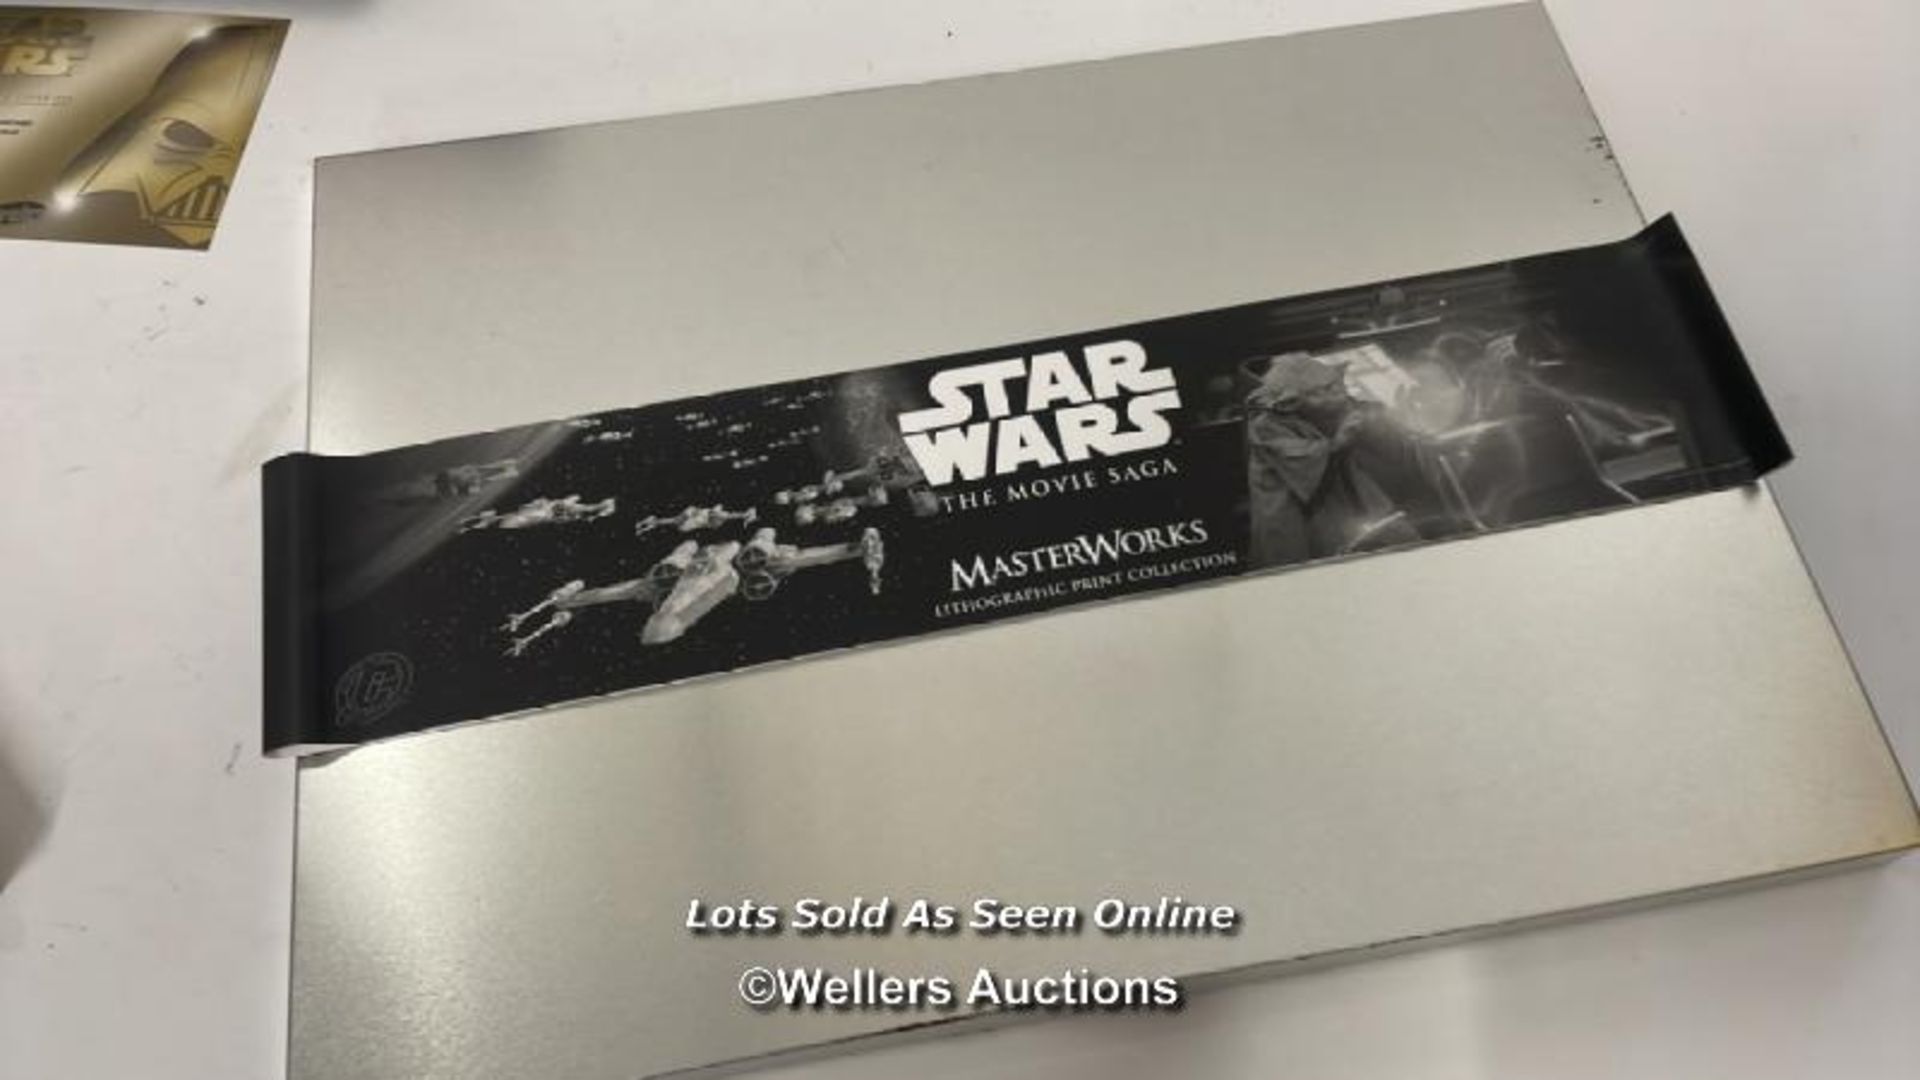 Star Wars saga lithographic print collection by Masterworks 2005 Limited edition 5163 / 8000, - Image 6 of 7